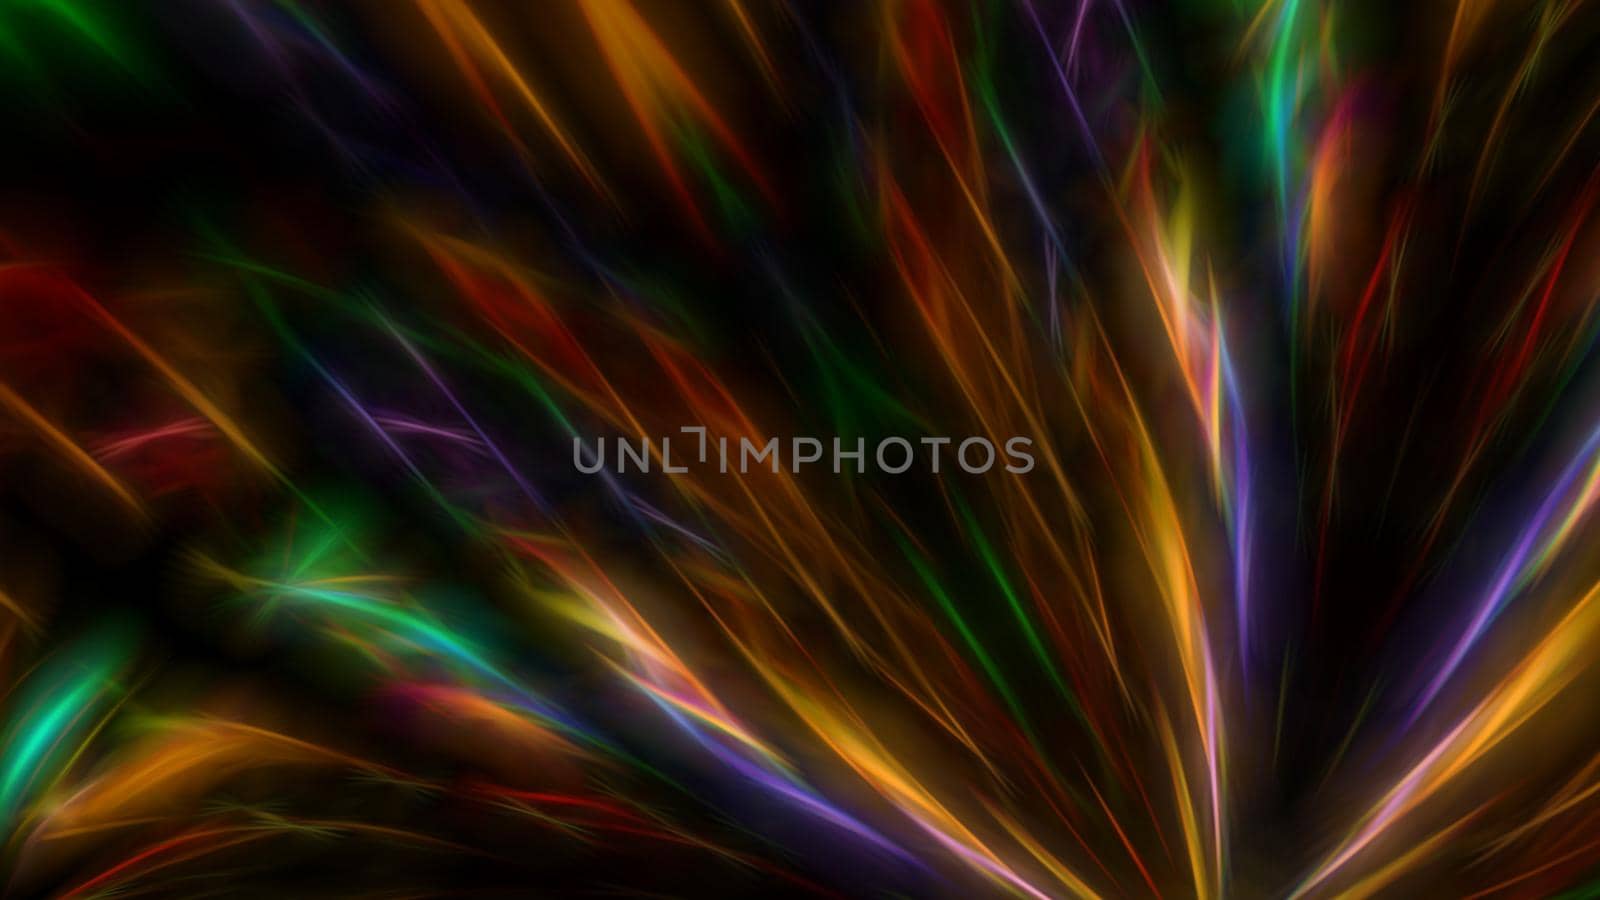 Abstract fractal background with glowing multi-colored lines. For design and network.